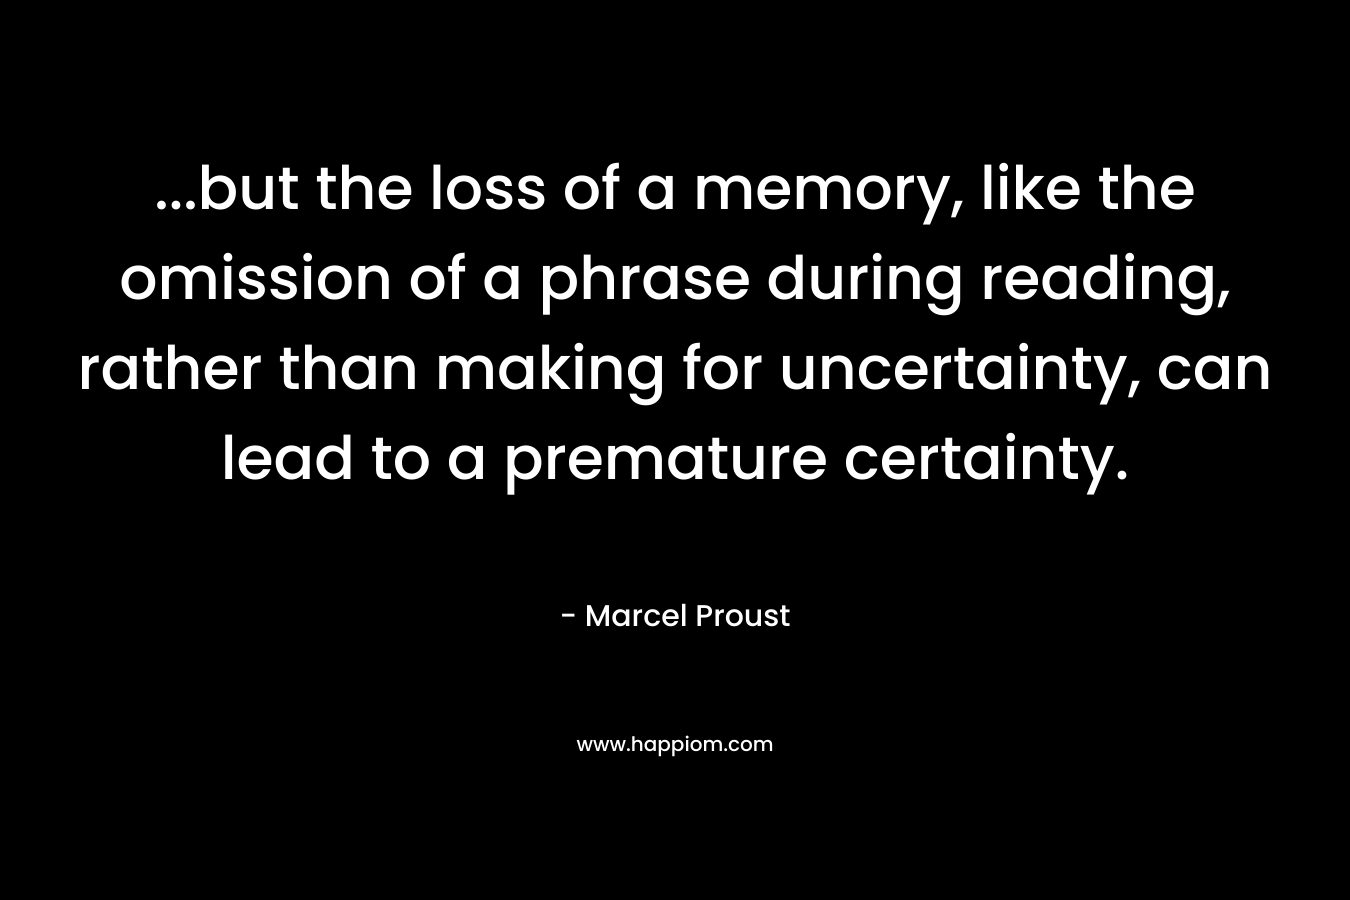 …but the loss of a memory, like the omission of a phrase during reading, rather than making for uncertainty, can lead to a premature certainty. – Marcel Proust